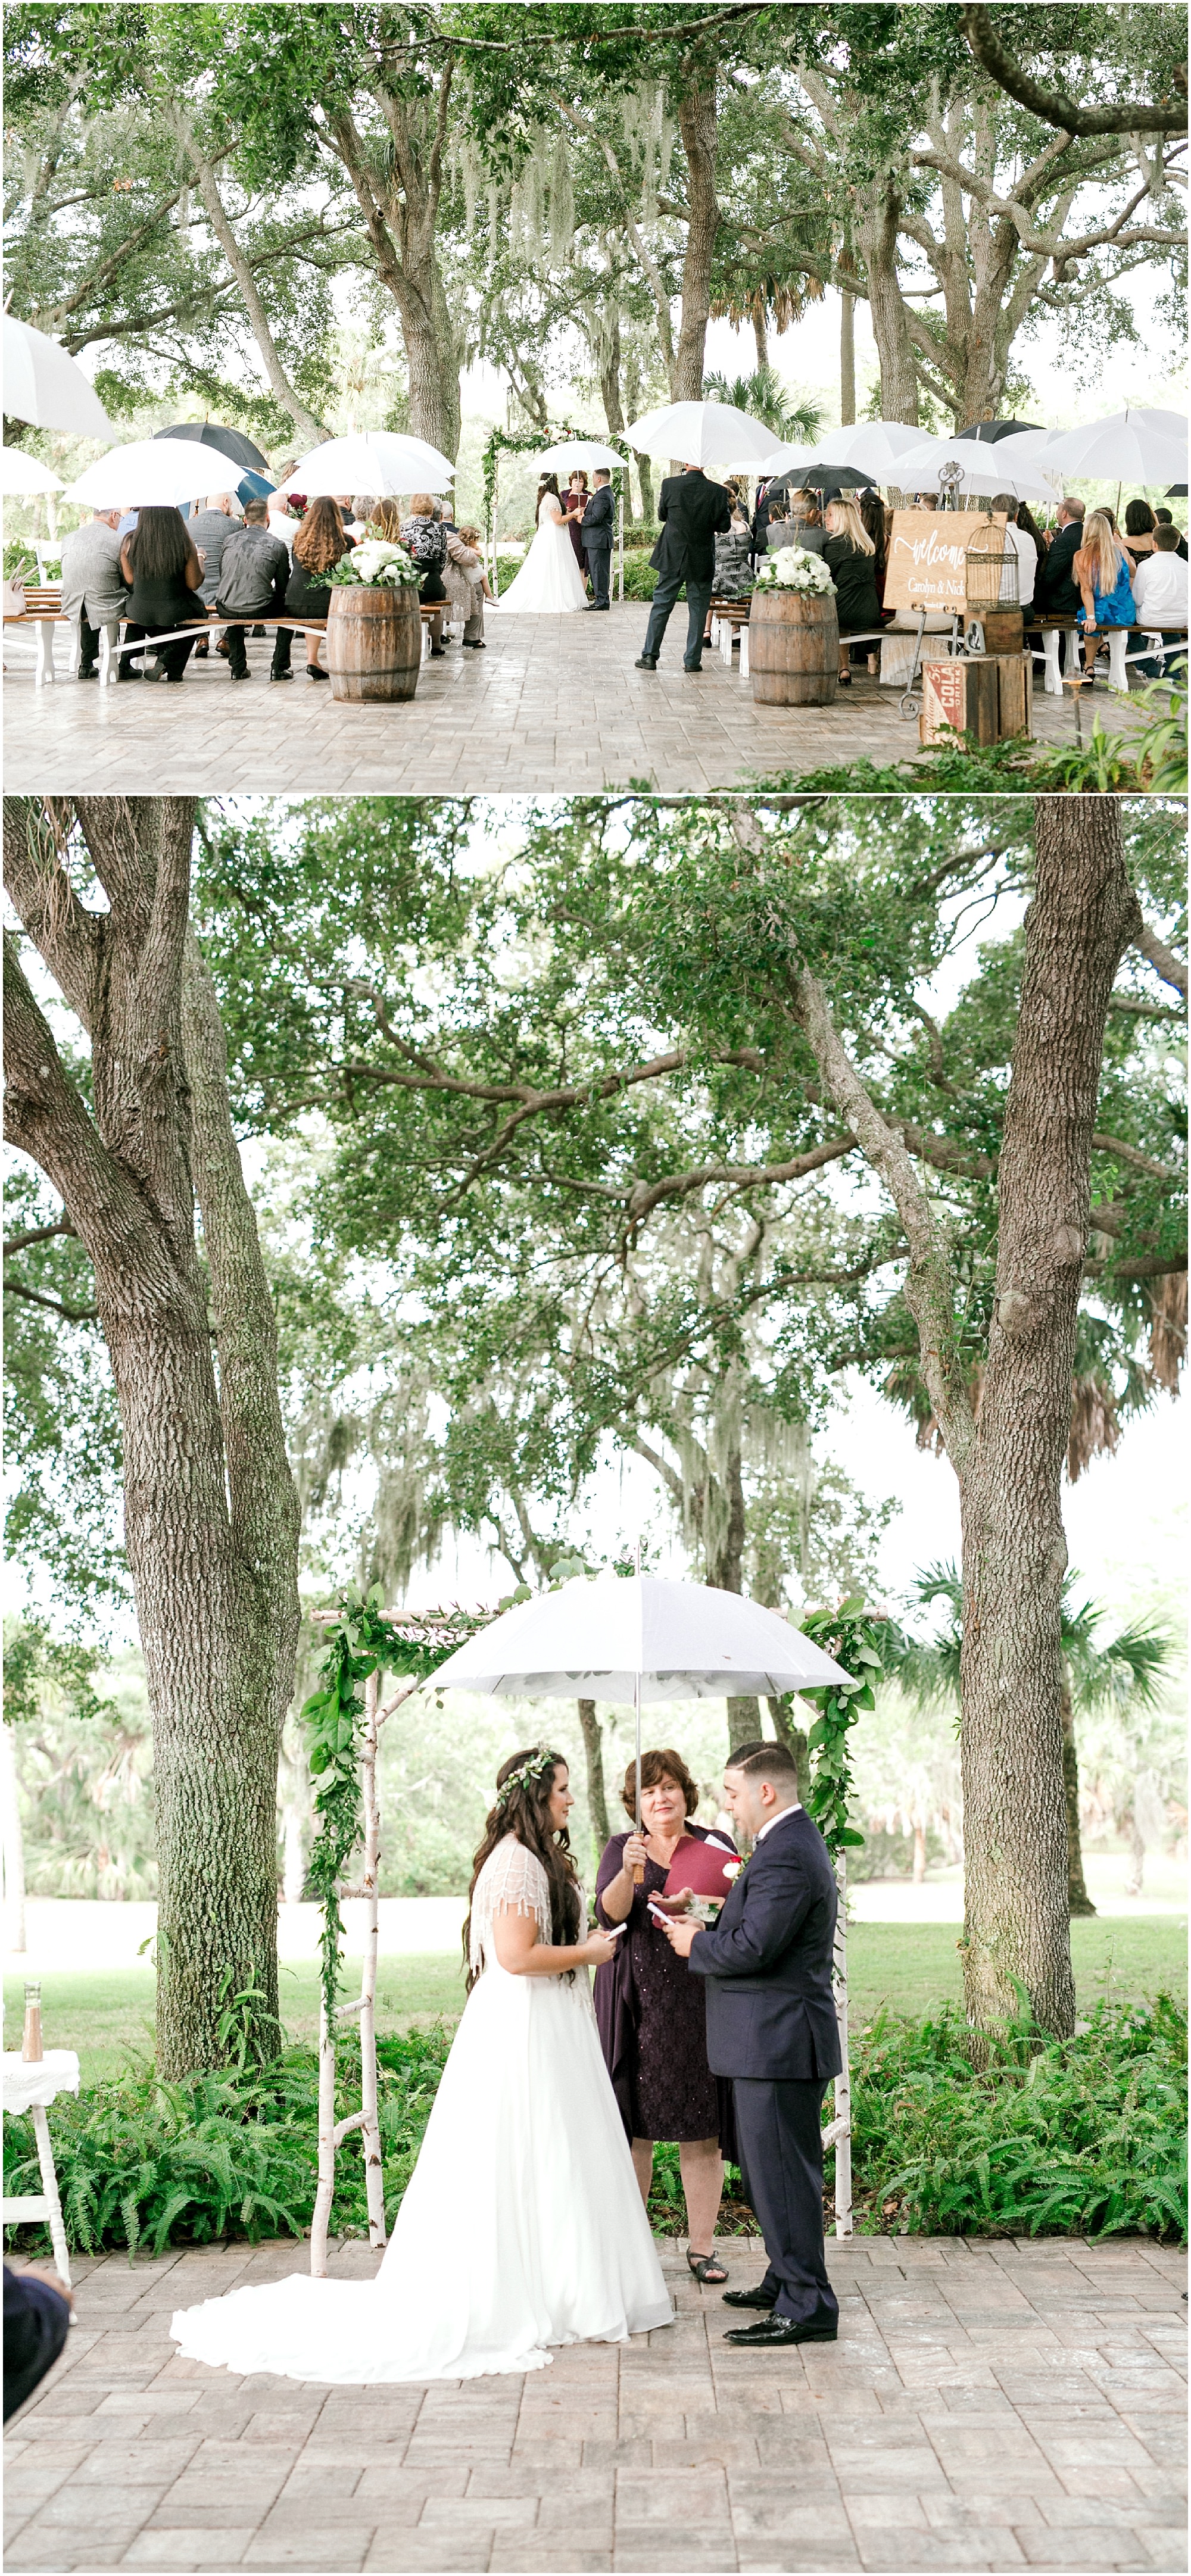 Wedding ceremony at Up the Creek Farms with guests holding umbrellas